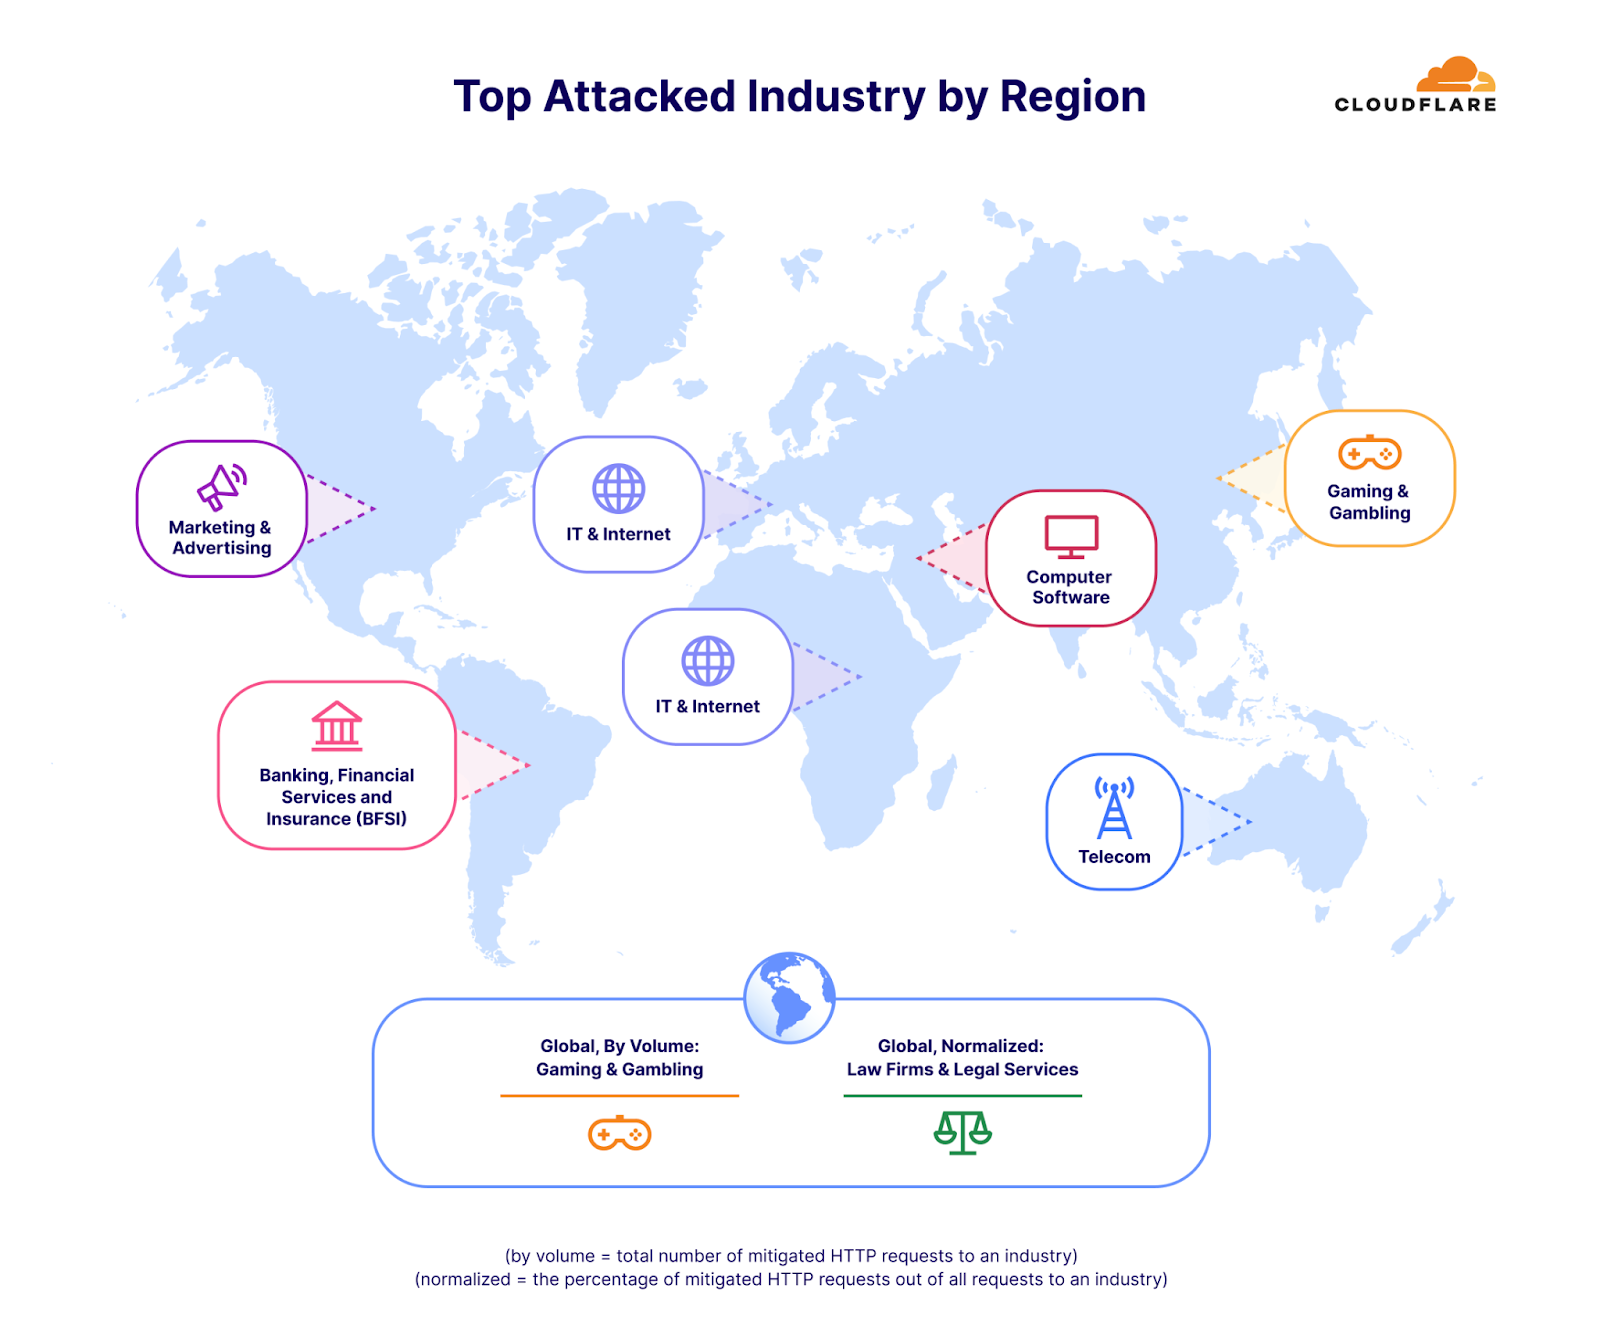 Top attacked industries by HTTP DDoS attacks, by region